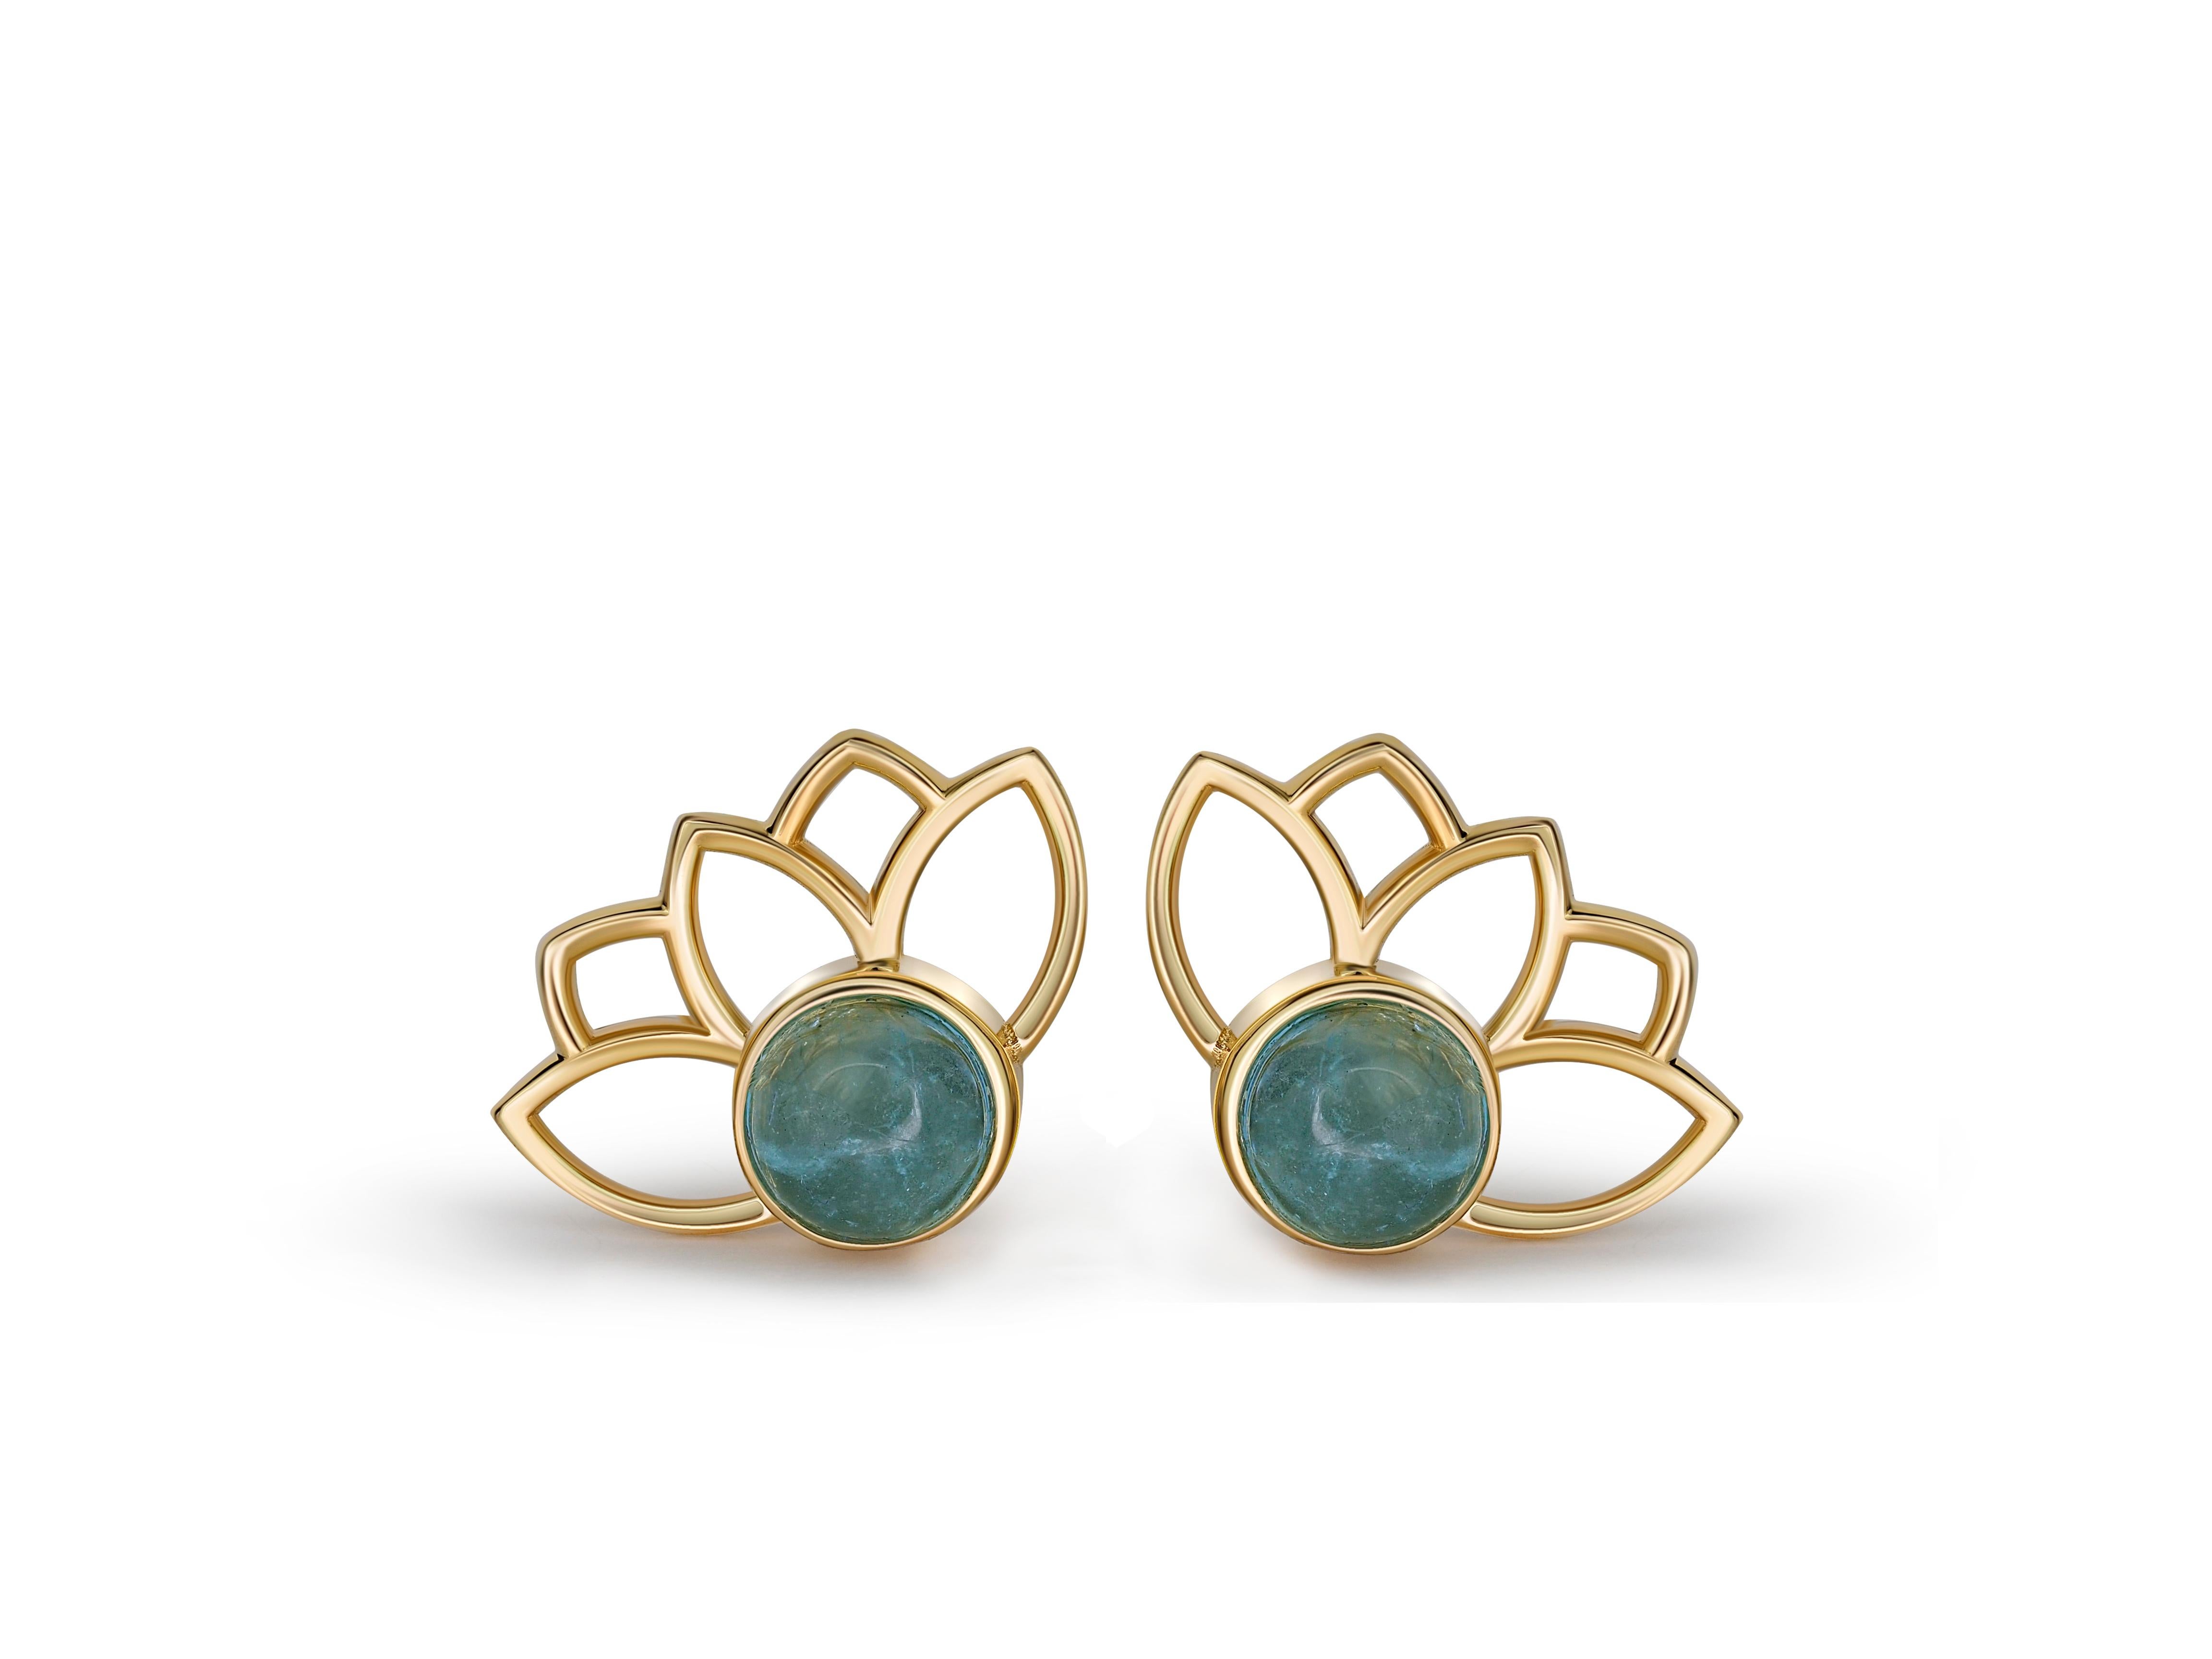 Cabochon Lotus Earrings Studs with Aquamarines in 14k Gold